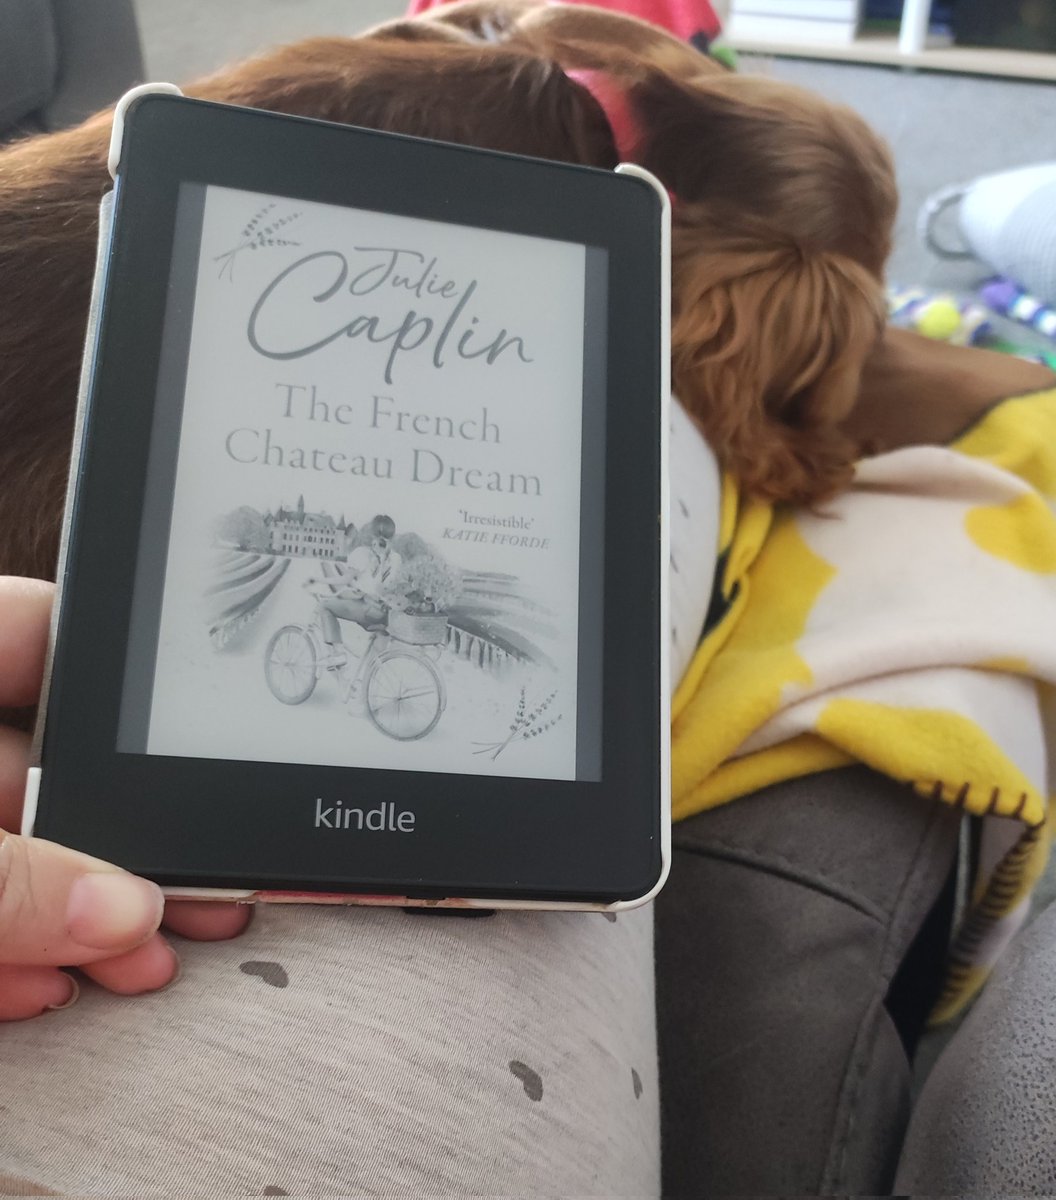 Early morning pup cuddles whilst I try and finish the wonderful upcoming release by @JulieCaplin The French Chateau Dream Preorder your copy now! amzn.eu/d/bOIMydj #bookblogger #blogtour #thefrenchchateaudream #romance #chicklit #rachelsrandomresources